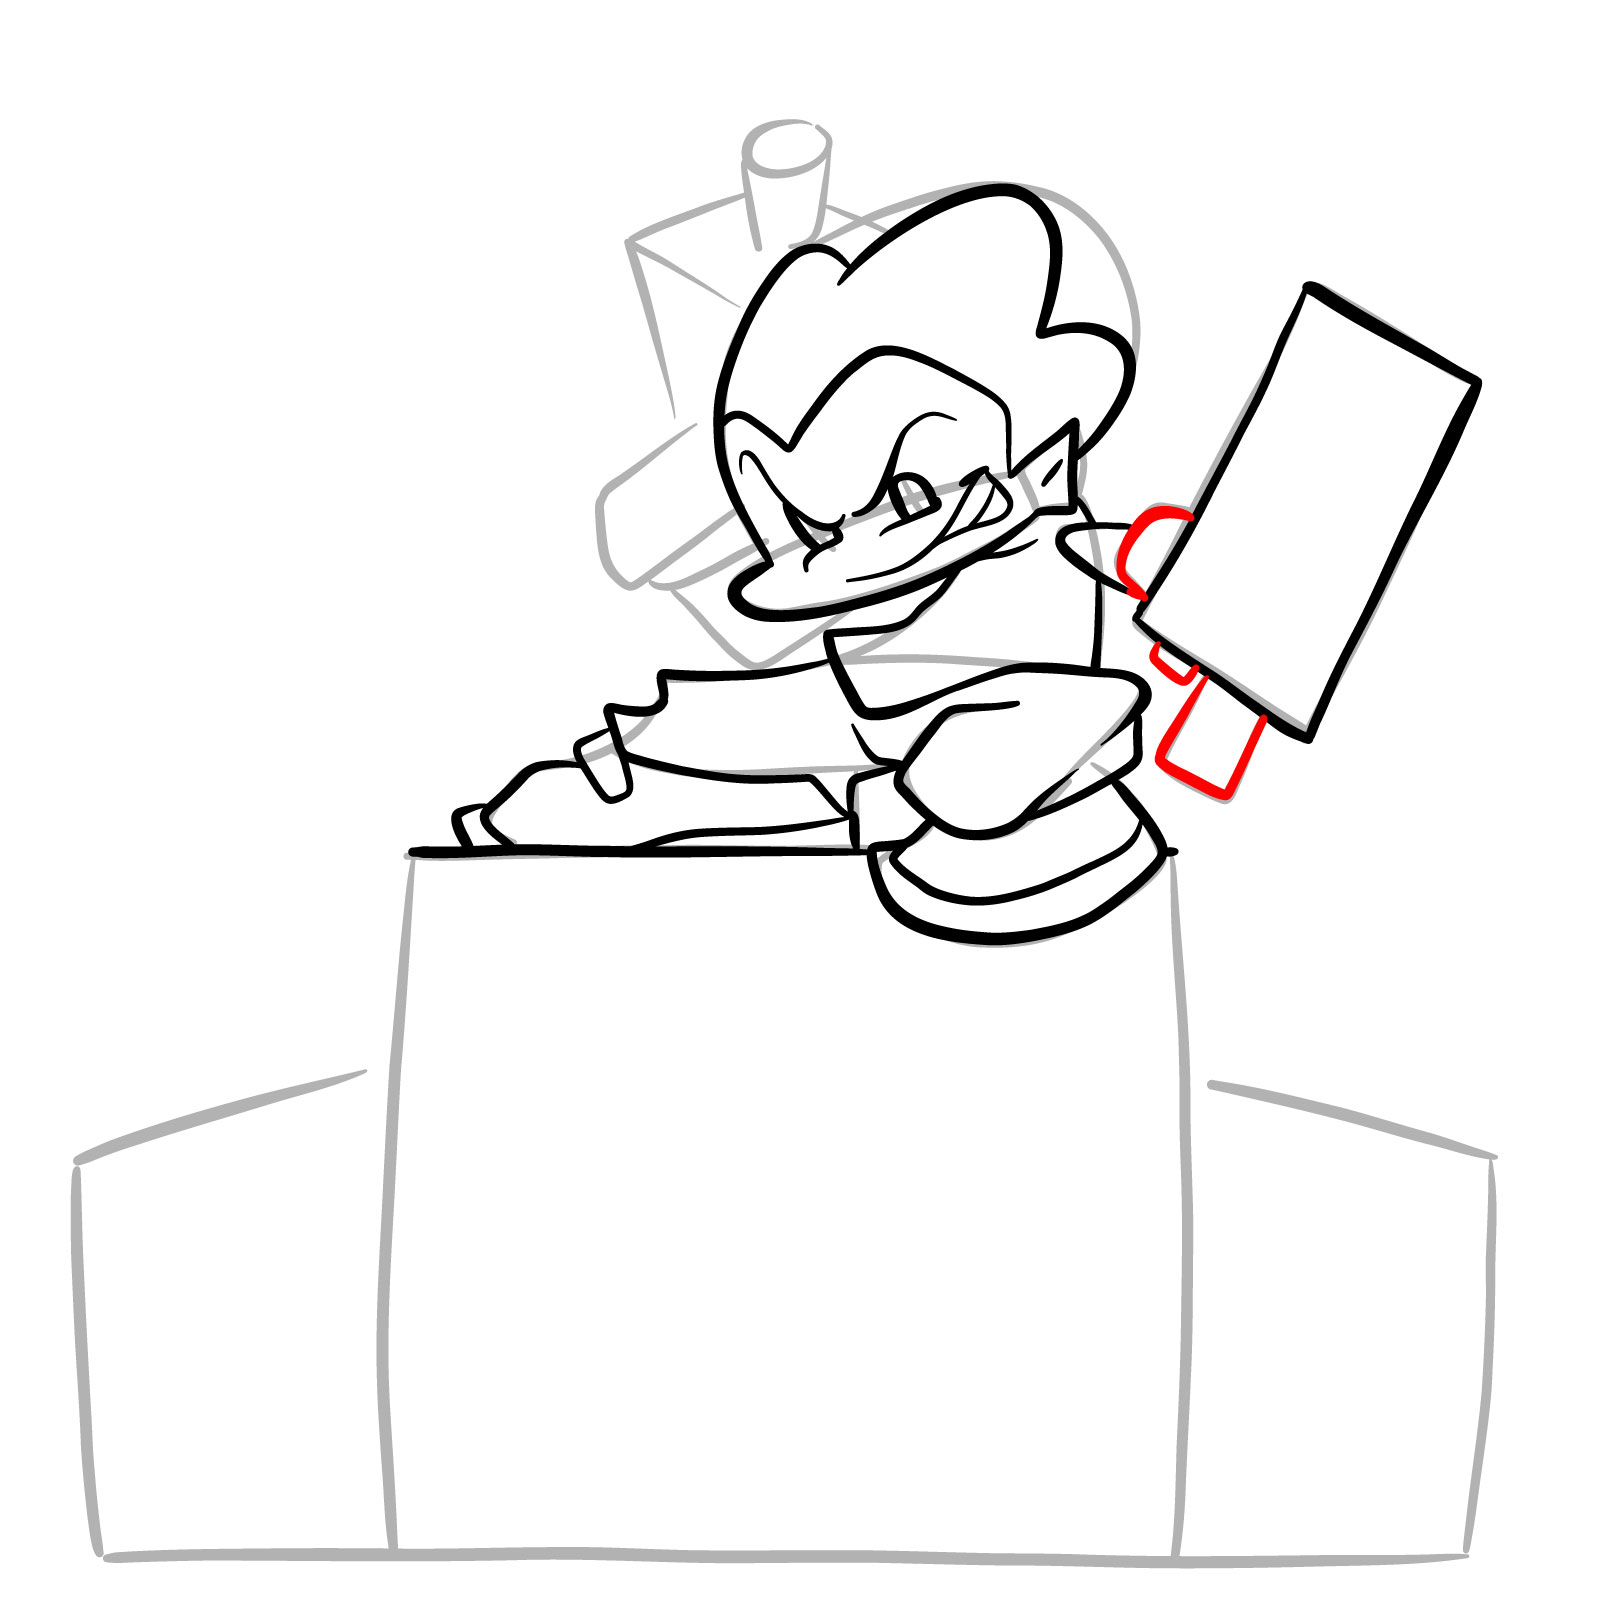 How to draw Pico on the speakers - step 17